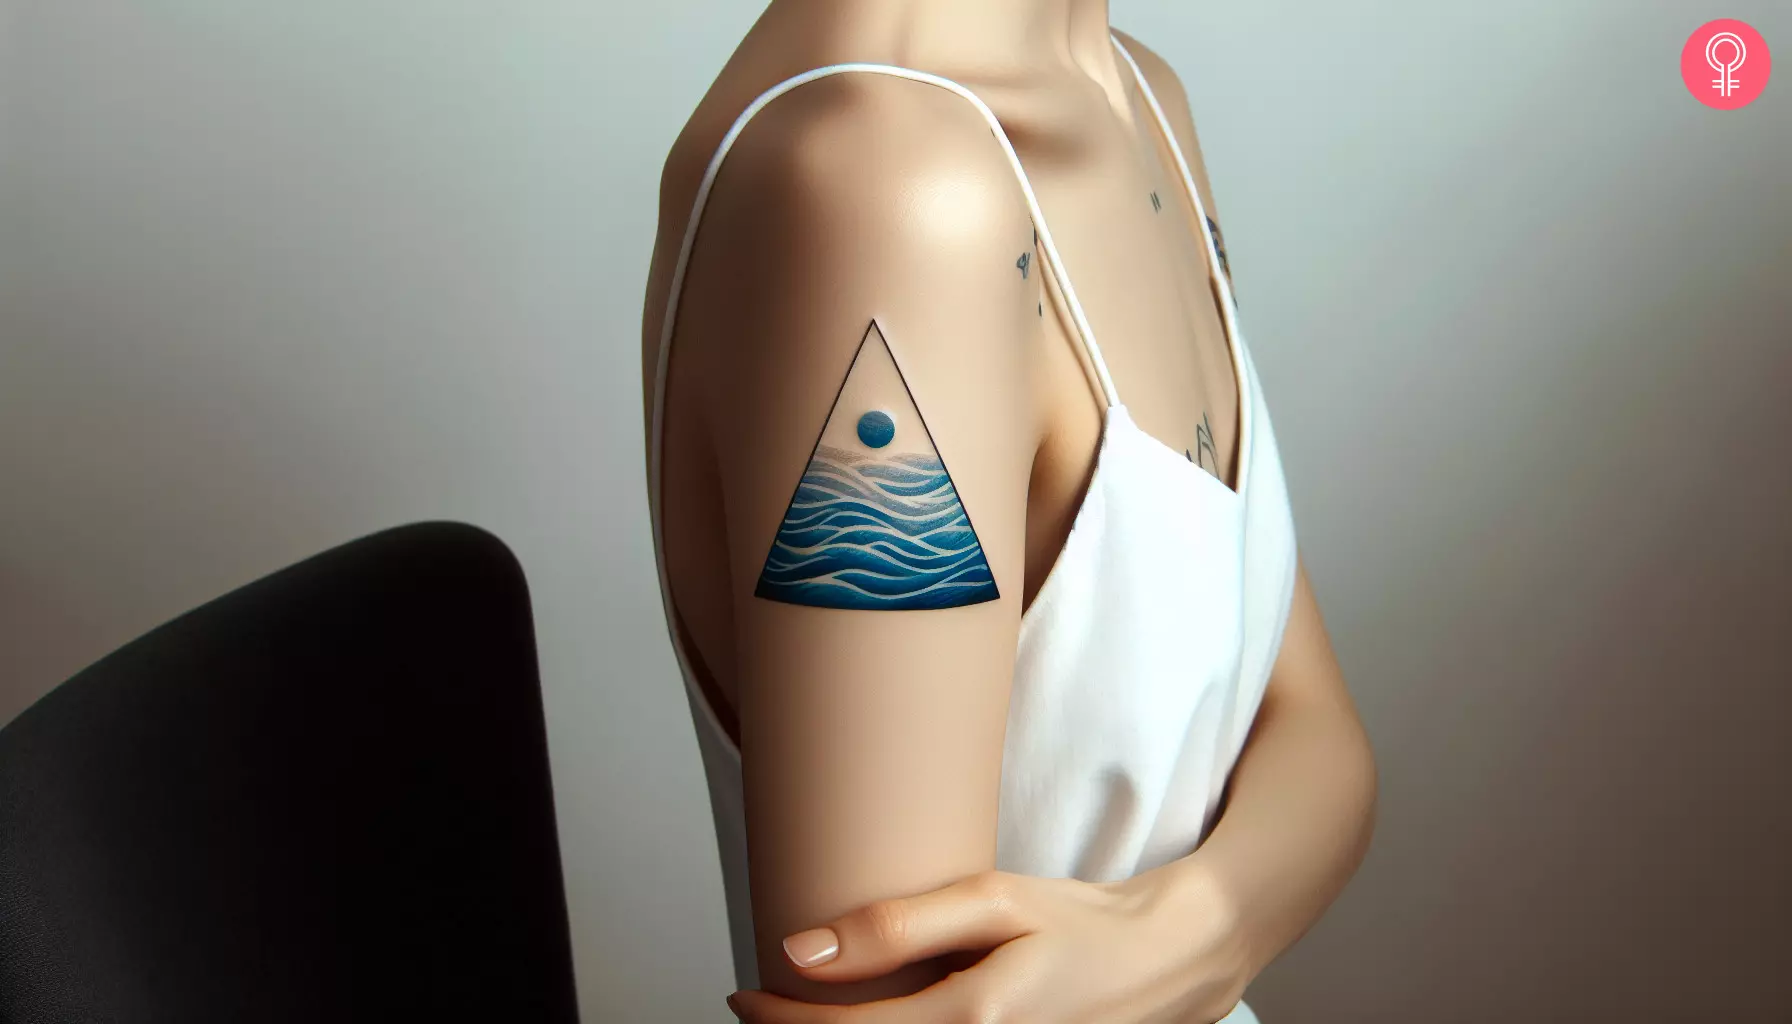 A woman with a water triangle tattoo on her upper arm